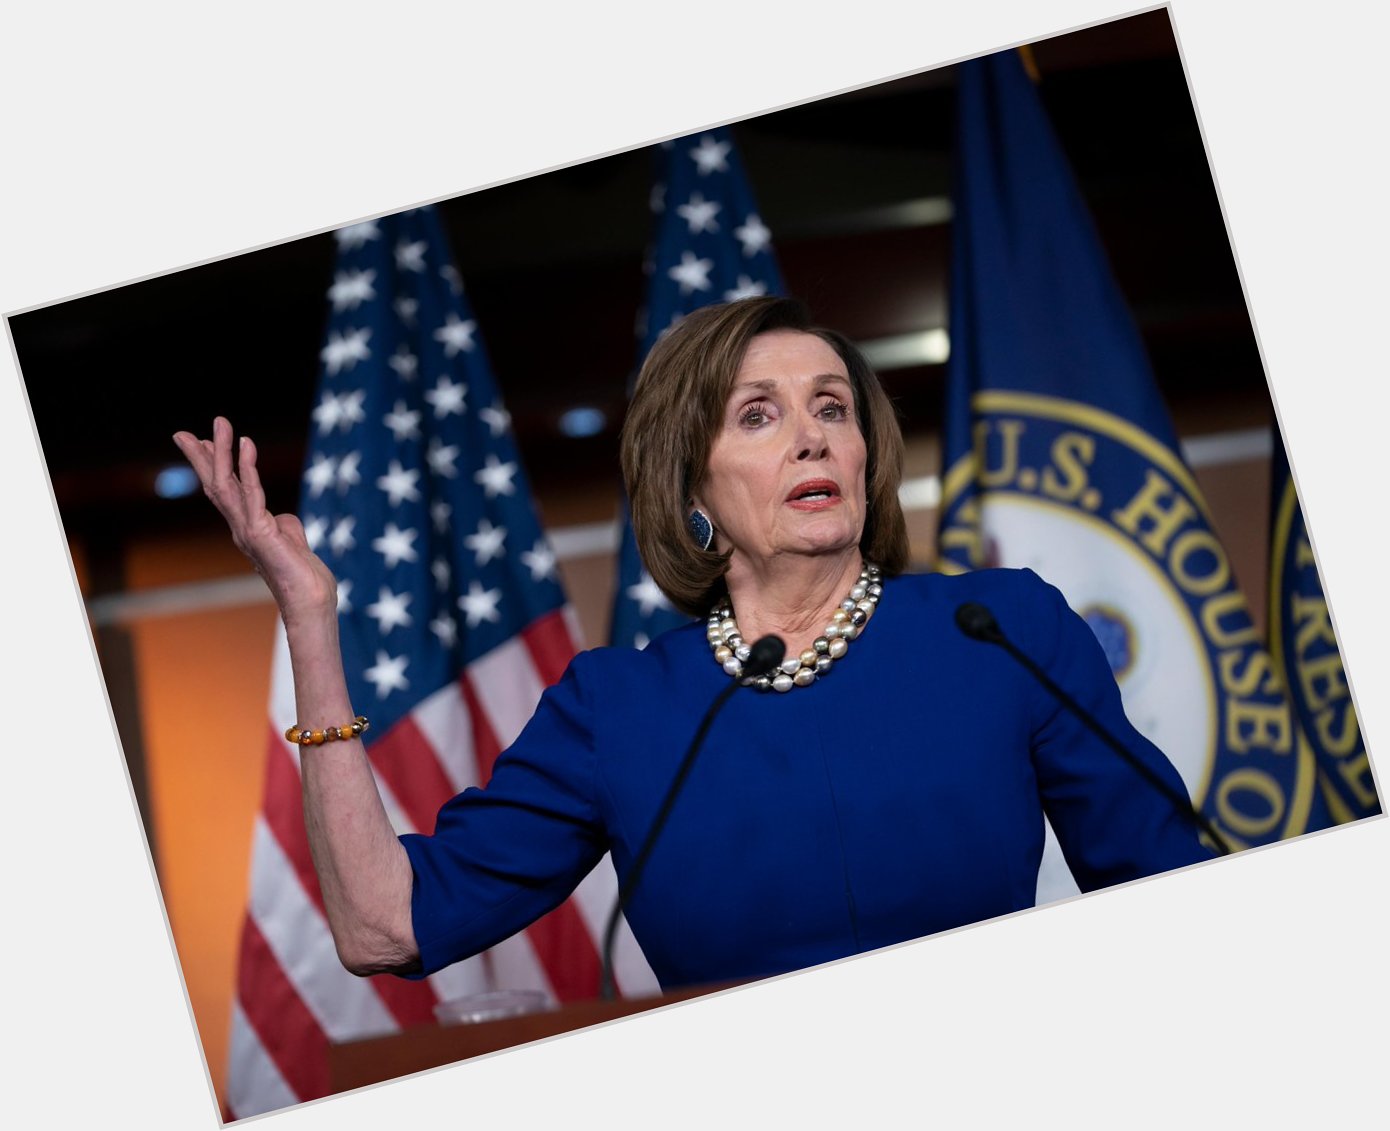   HAPPY BIRTHDAY to House Speaker Nancy Pelosi who is 80 years young today.  